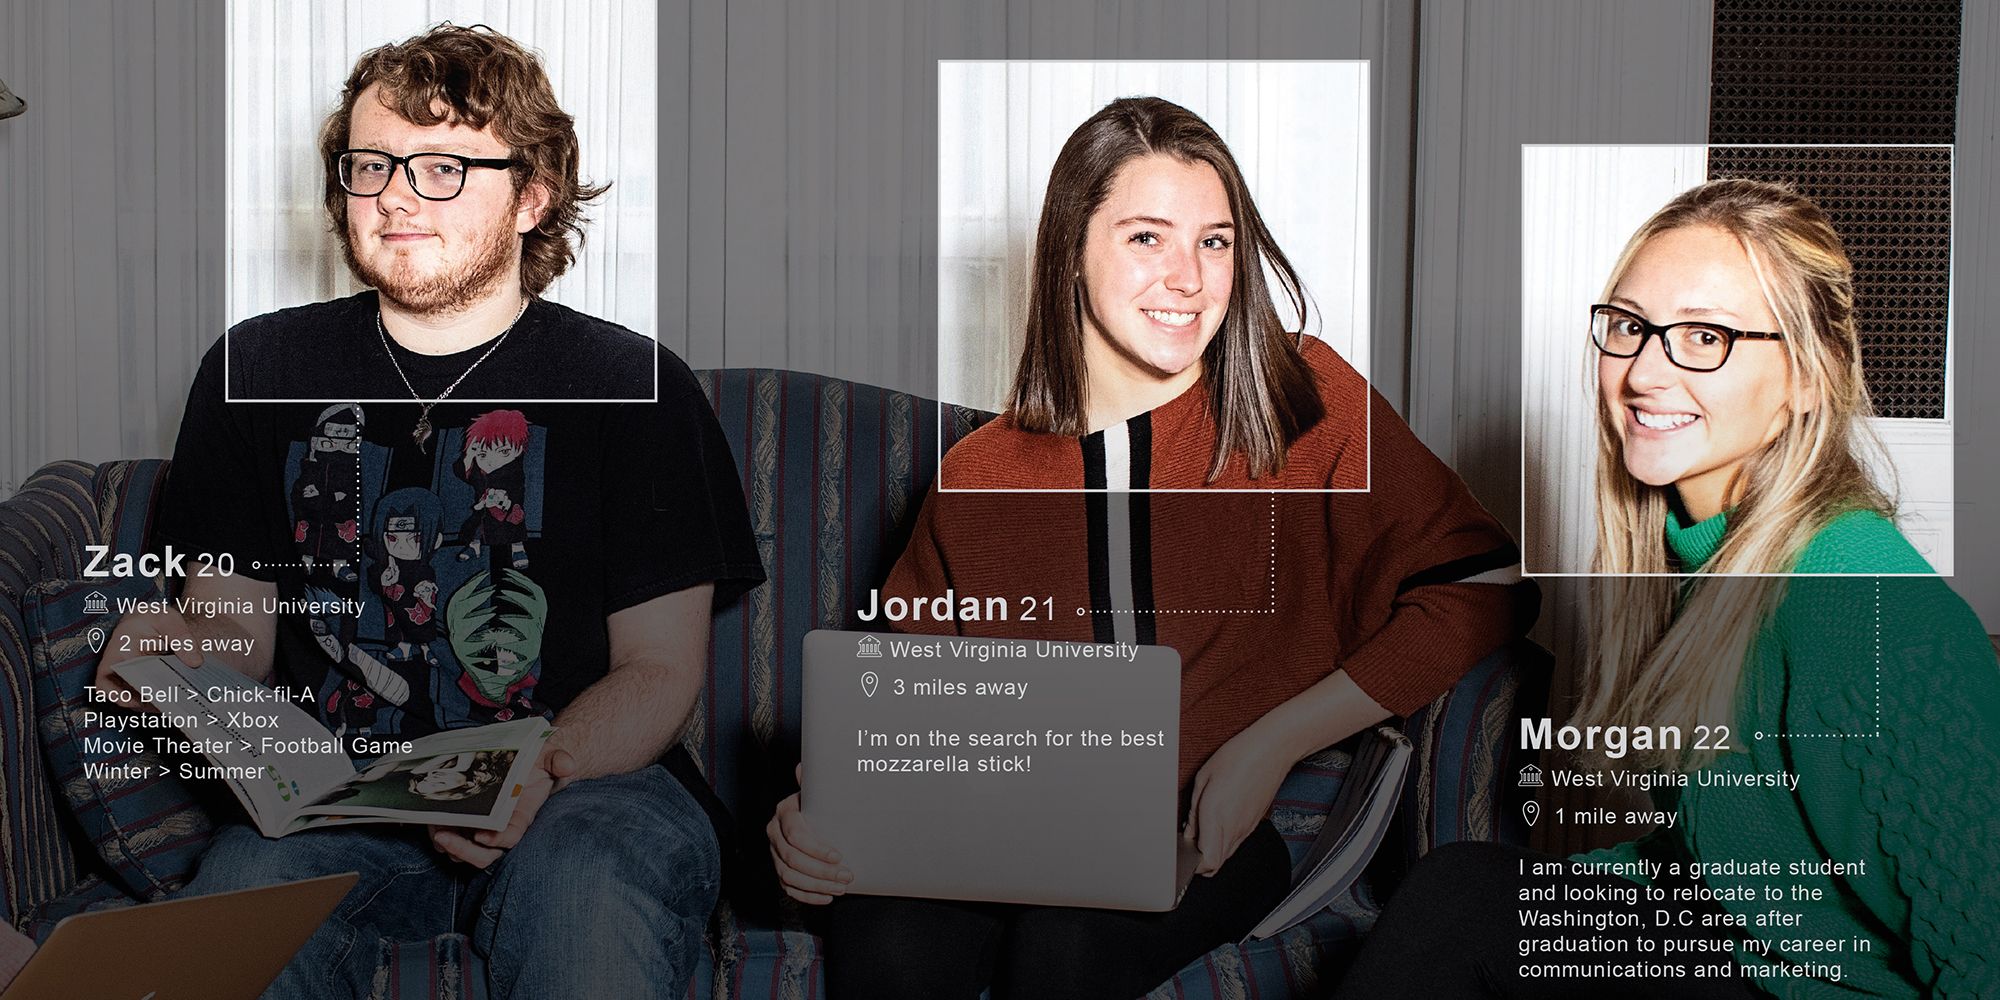 Image of two women and a man with dating profiles superimposed over the group shot for each.